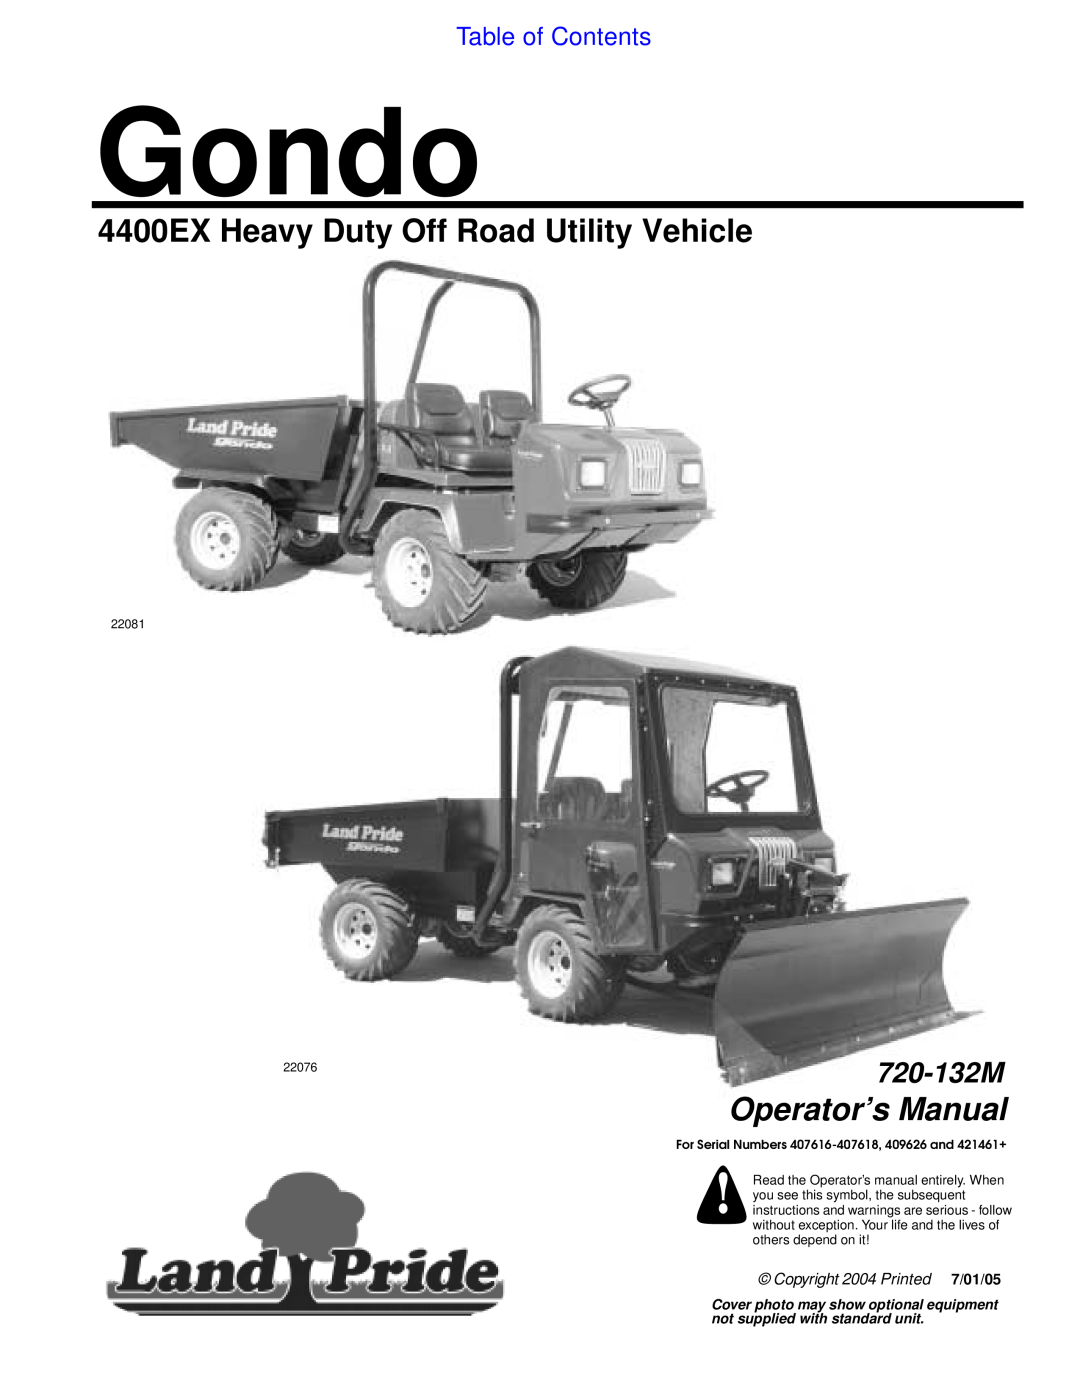 Land Pride 22076 manual 4400EX Heavy Duty Off Road Utility Vehicle, Table of Contents, Gondo, Operator’s Manual, 720-132M 